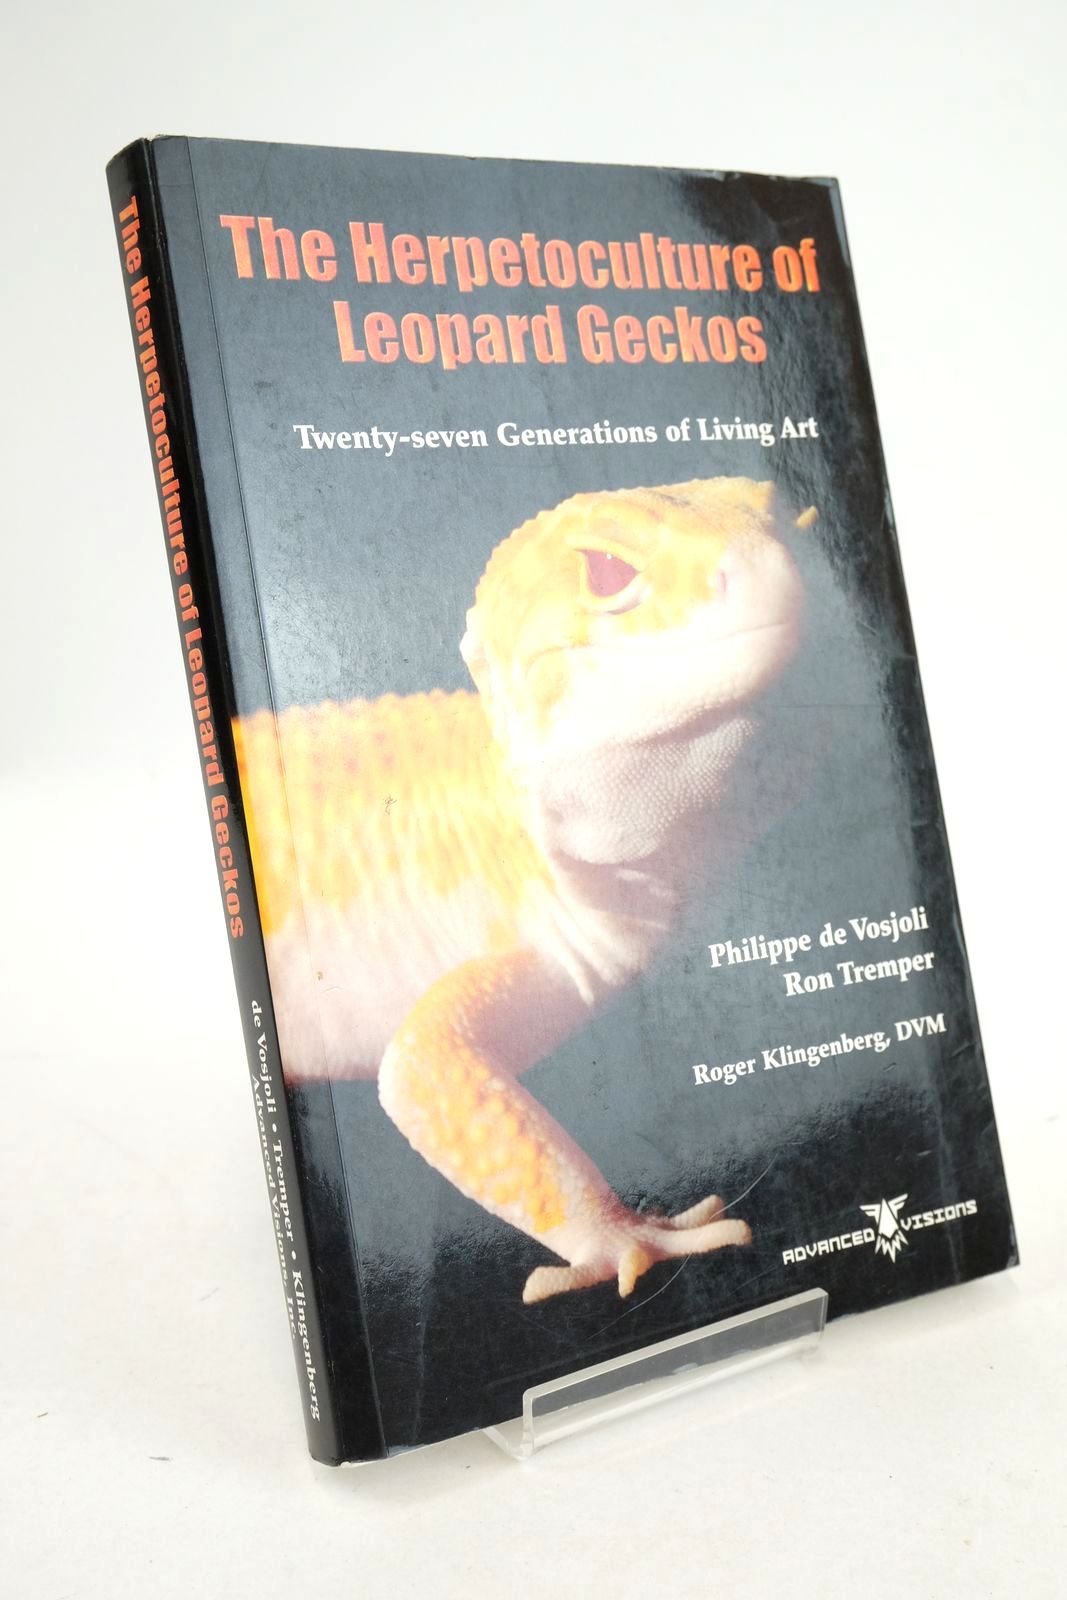 Photo of THE HERPETOCULTURE OF LEOPARD GECKOS: TWENTY-SEVEN GENERATIONS OF LIVING ART written by De Vosjoli, Philippe Tremper, Ron Klingenberg, Roger published by Advanced Visions Inc. (STOCK CODE: 1325733)  for sale by Stella & Rose's Books